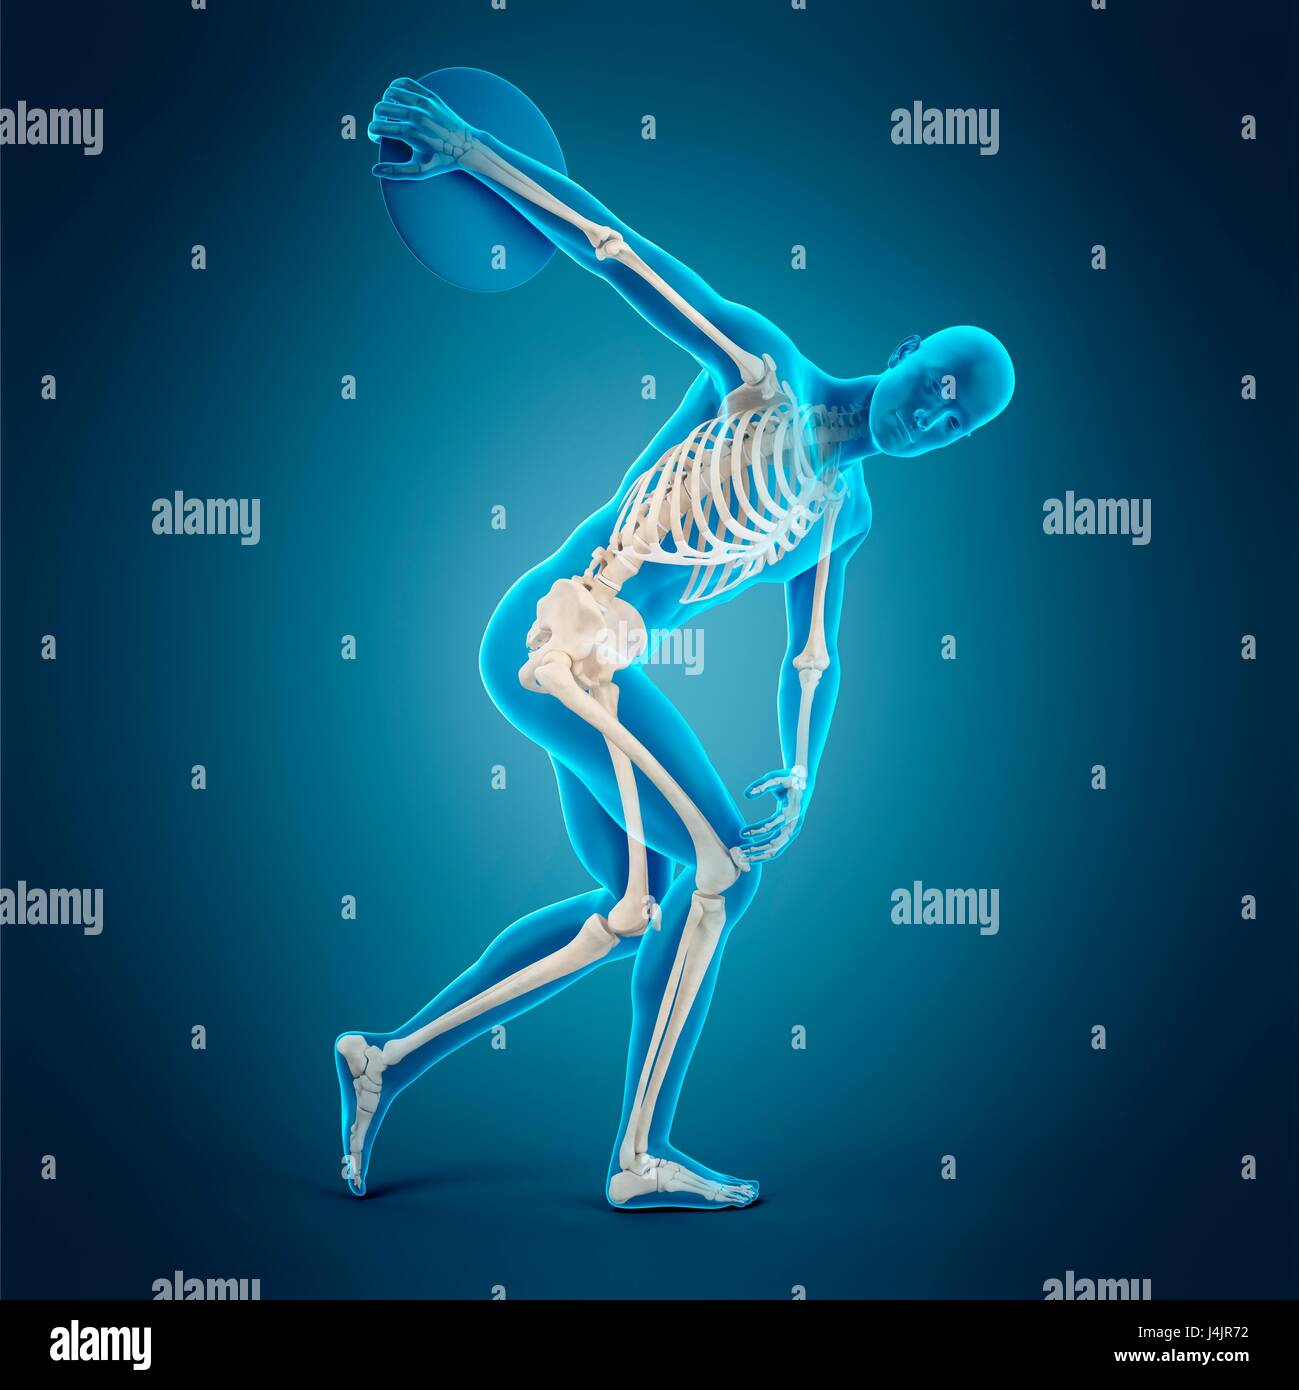 Skeletal structure of athlete throwing discus, illustration Stock Photo ...